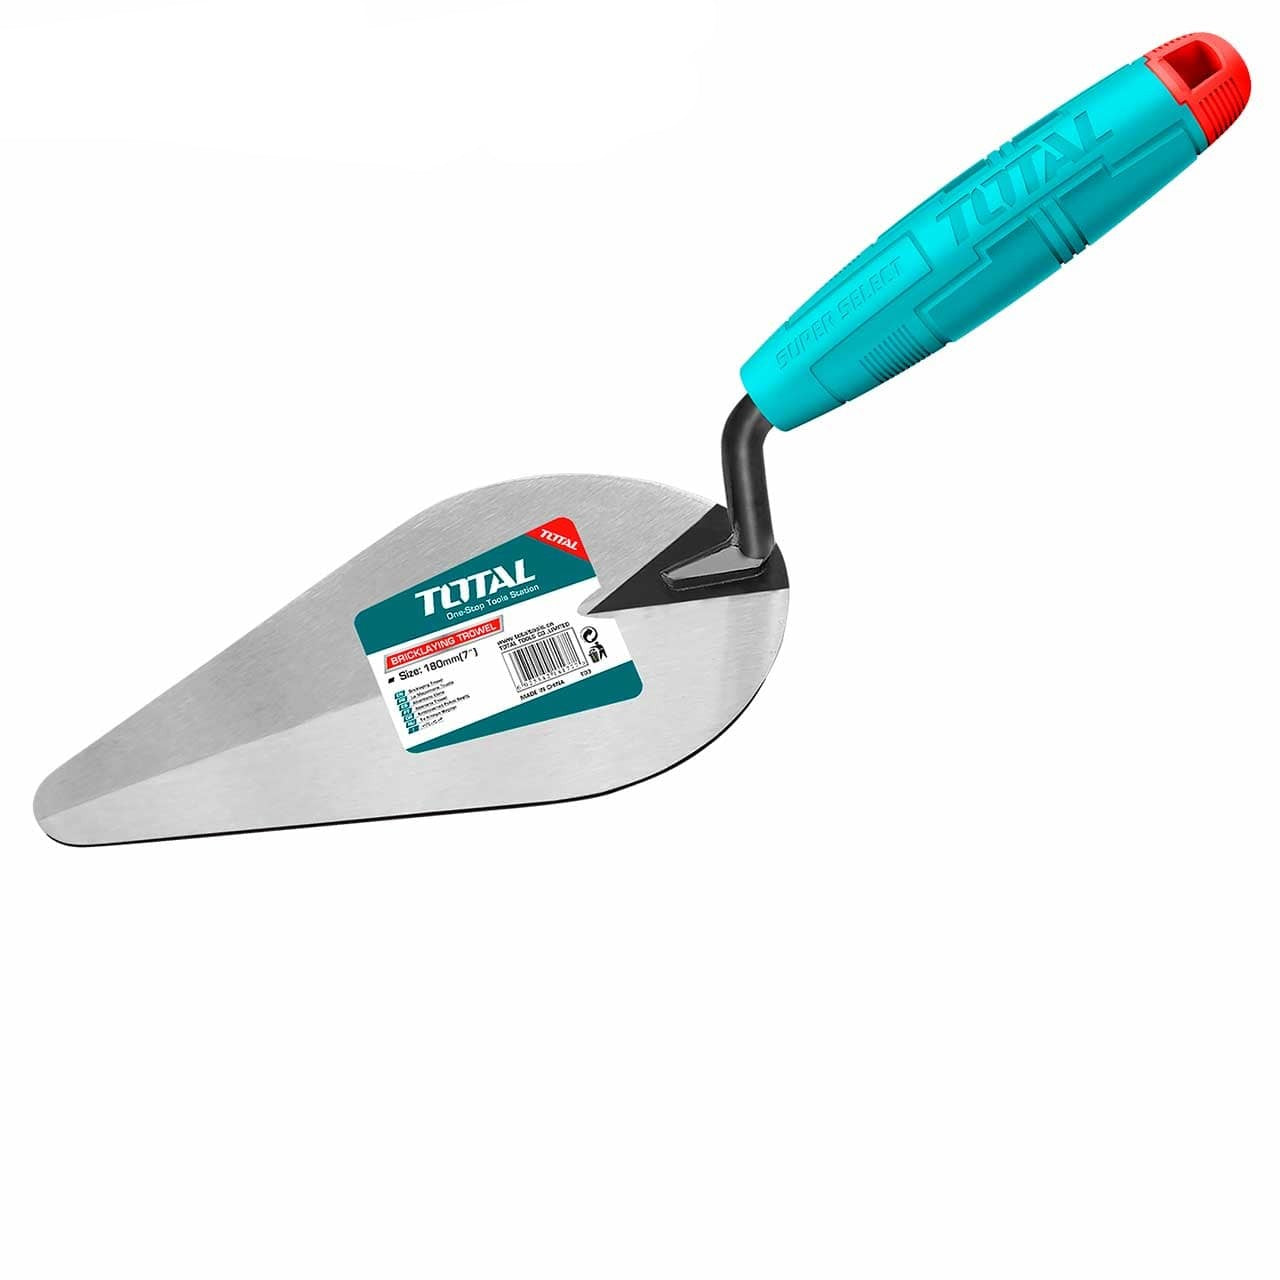 Total Bricklaying Trowel (plastic handle) 7''/180mm - THT827125 | Supply Master Accra, Ghana Specialty Hand Tools Buy Tools hardware Building materials